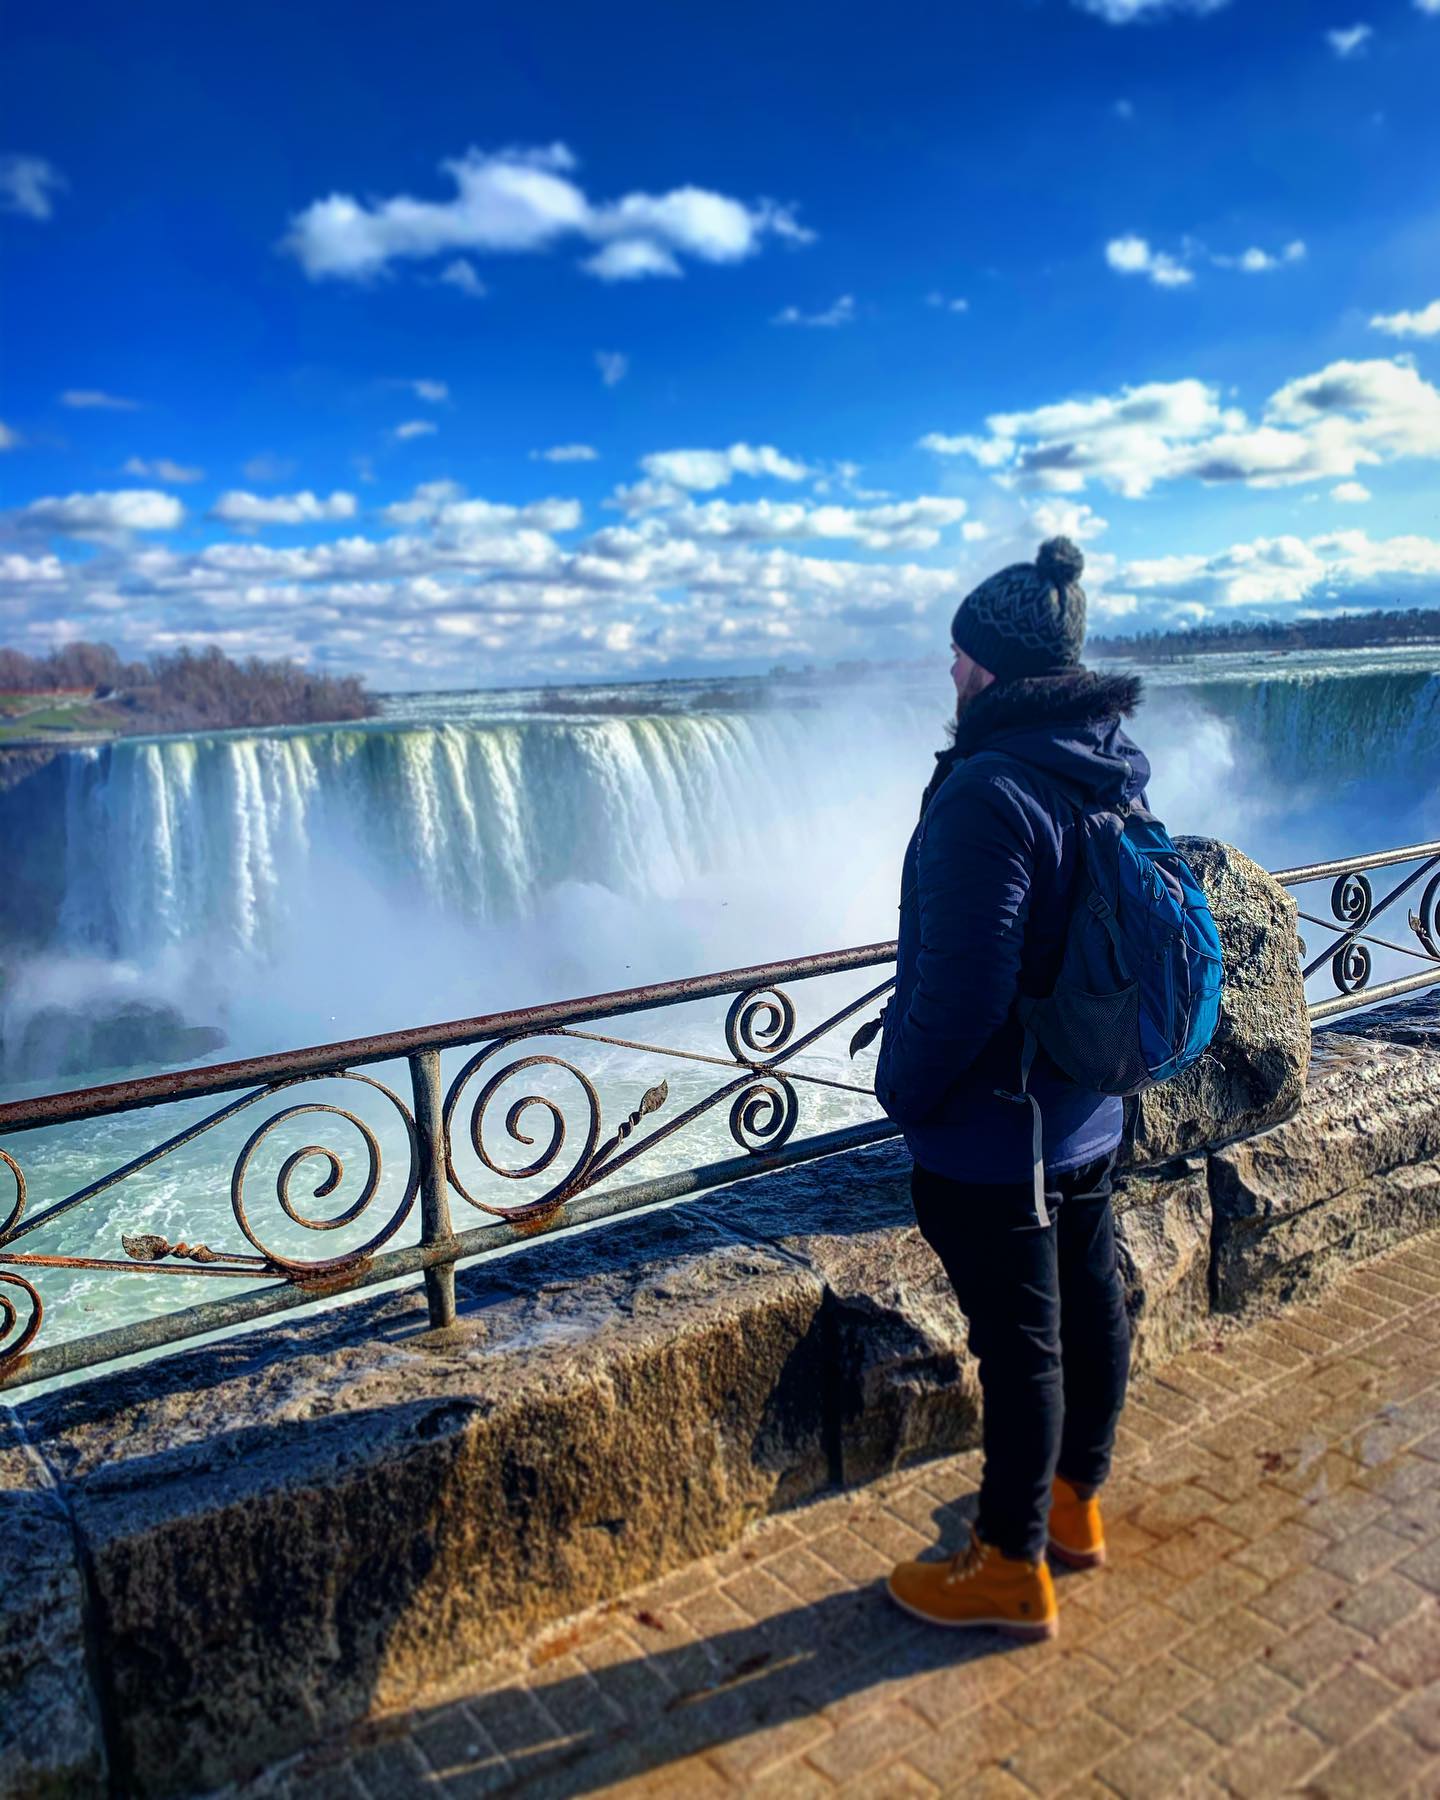 Don’t take advice from TLC, because I’ve been chasing waterfalls for years now and each one trumps the last one 🌈💦
Don’t forget to scroll 😜👉🏼
•
•
•
#love #instagood #photooftheday #beautiful #happy #cute #tbt #like4like #pic #selfie #summer #friends #repost #nature #canada #usa #border #niagara #niagarafalls #ontario #waterfalls #rivers #geography #wildlife #rainbow #explorer #exploration #adventure  #thejollygringo